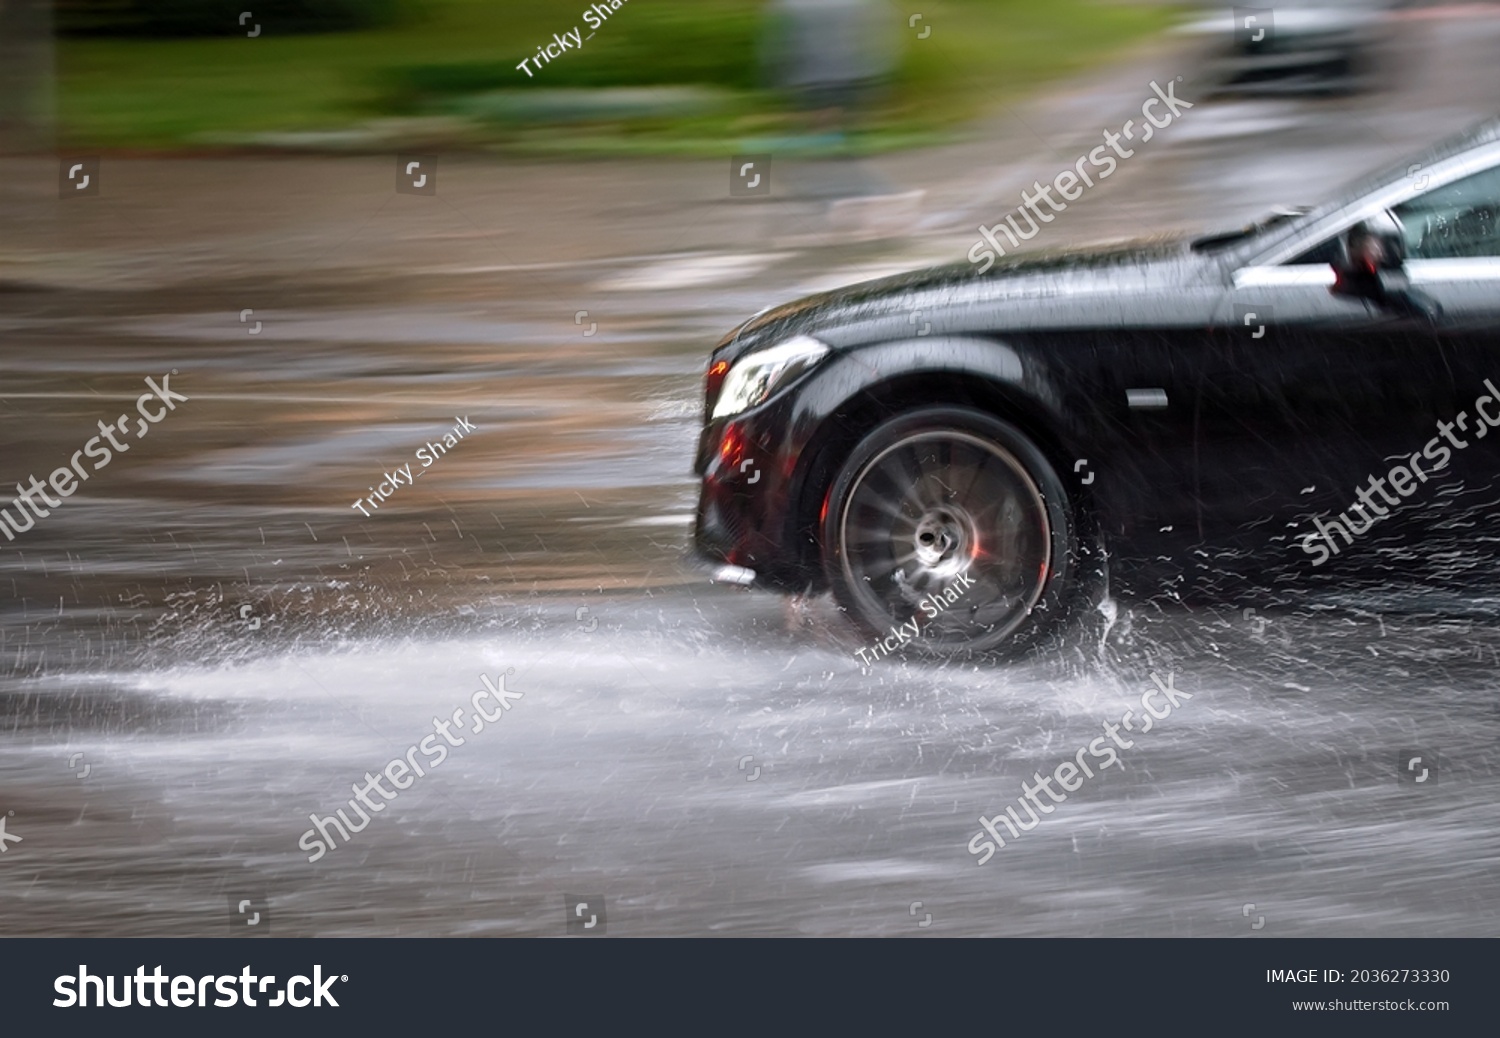 Car driving fast through big puddle at heavy rain, water splashing over the car. Car driving on asphalt road at heavy rain. Dangerous driving conditions. Dangers of aquaplaning. MOTION BLUR #2036273330